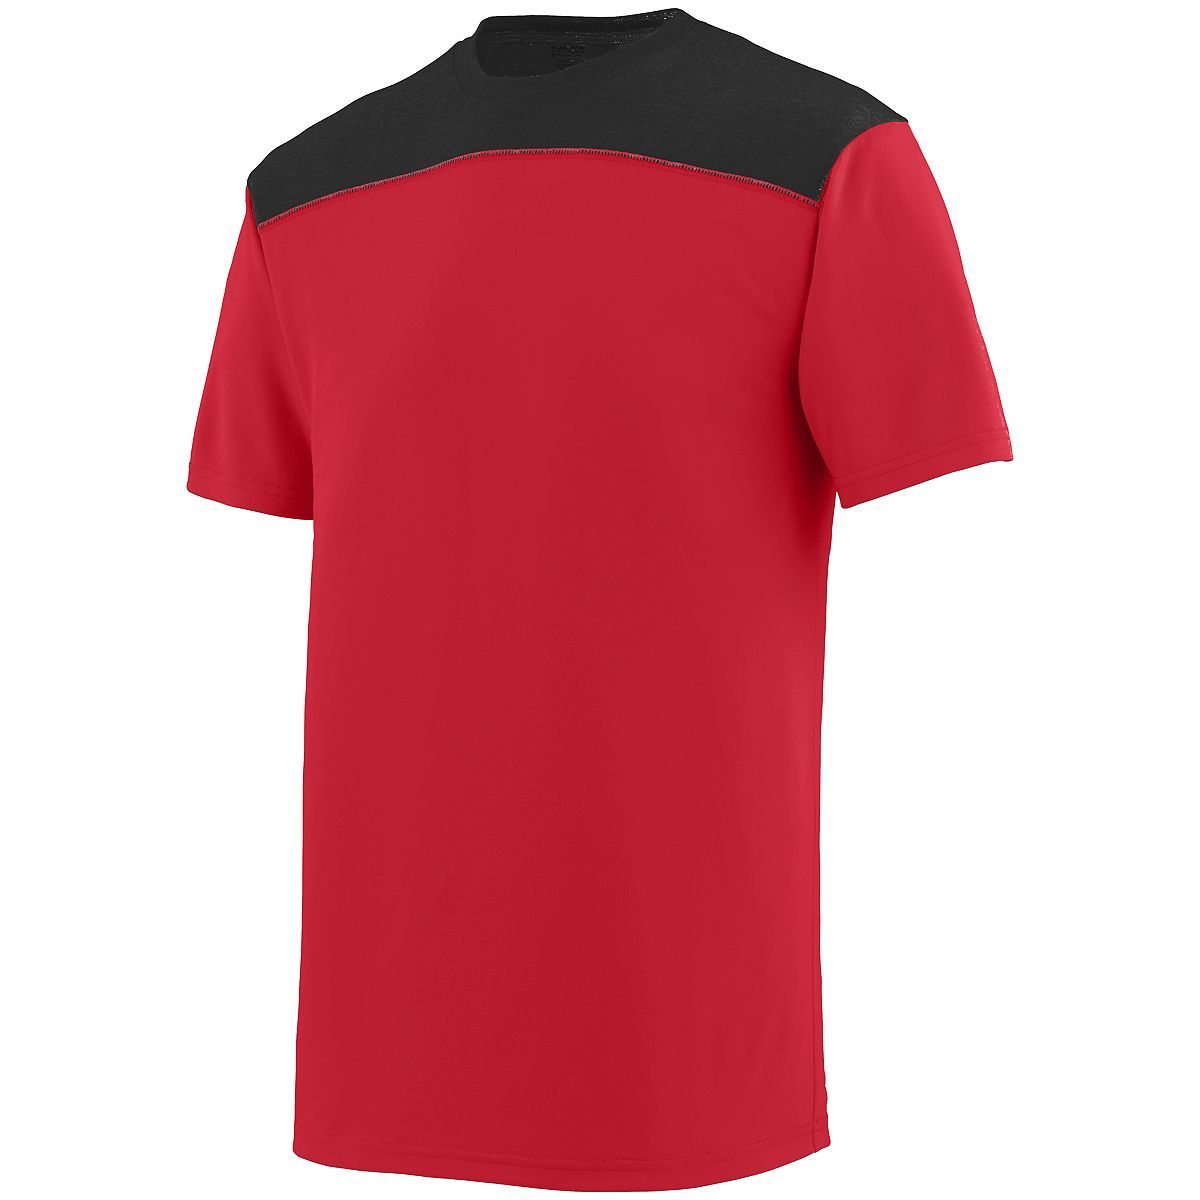 Augusta Sportswear Challenge T-Shirt in Red/Black  -Part of the Adult, Adult-Tee-Shirt, T-Shirts, Augusta-Products, Shirts product lines at KanaleyCreations.com